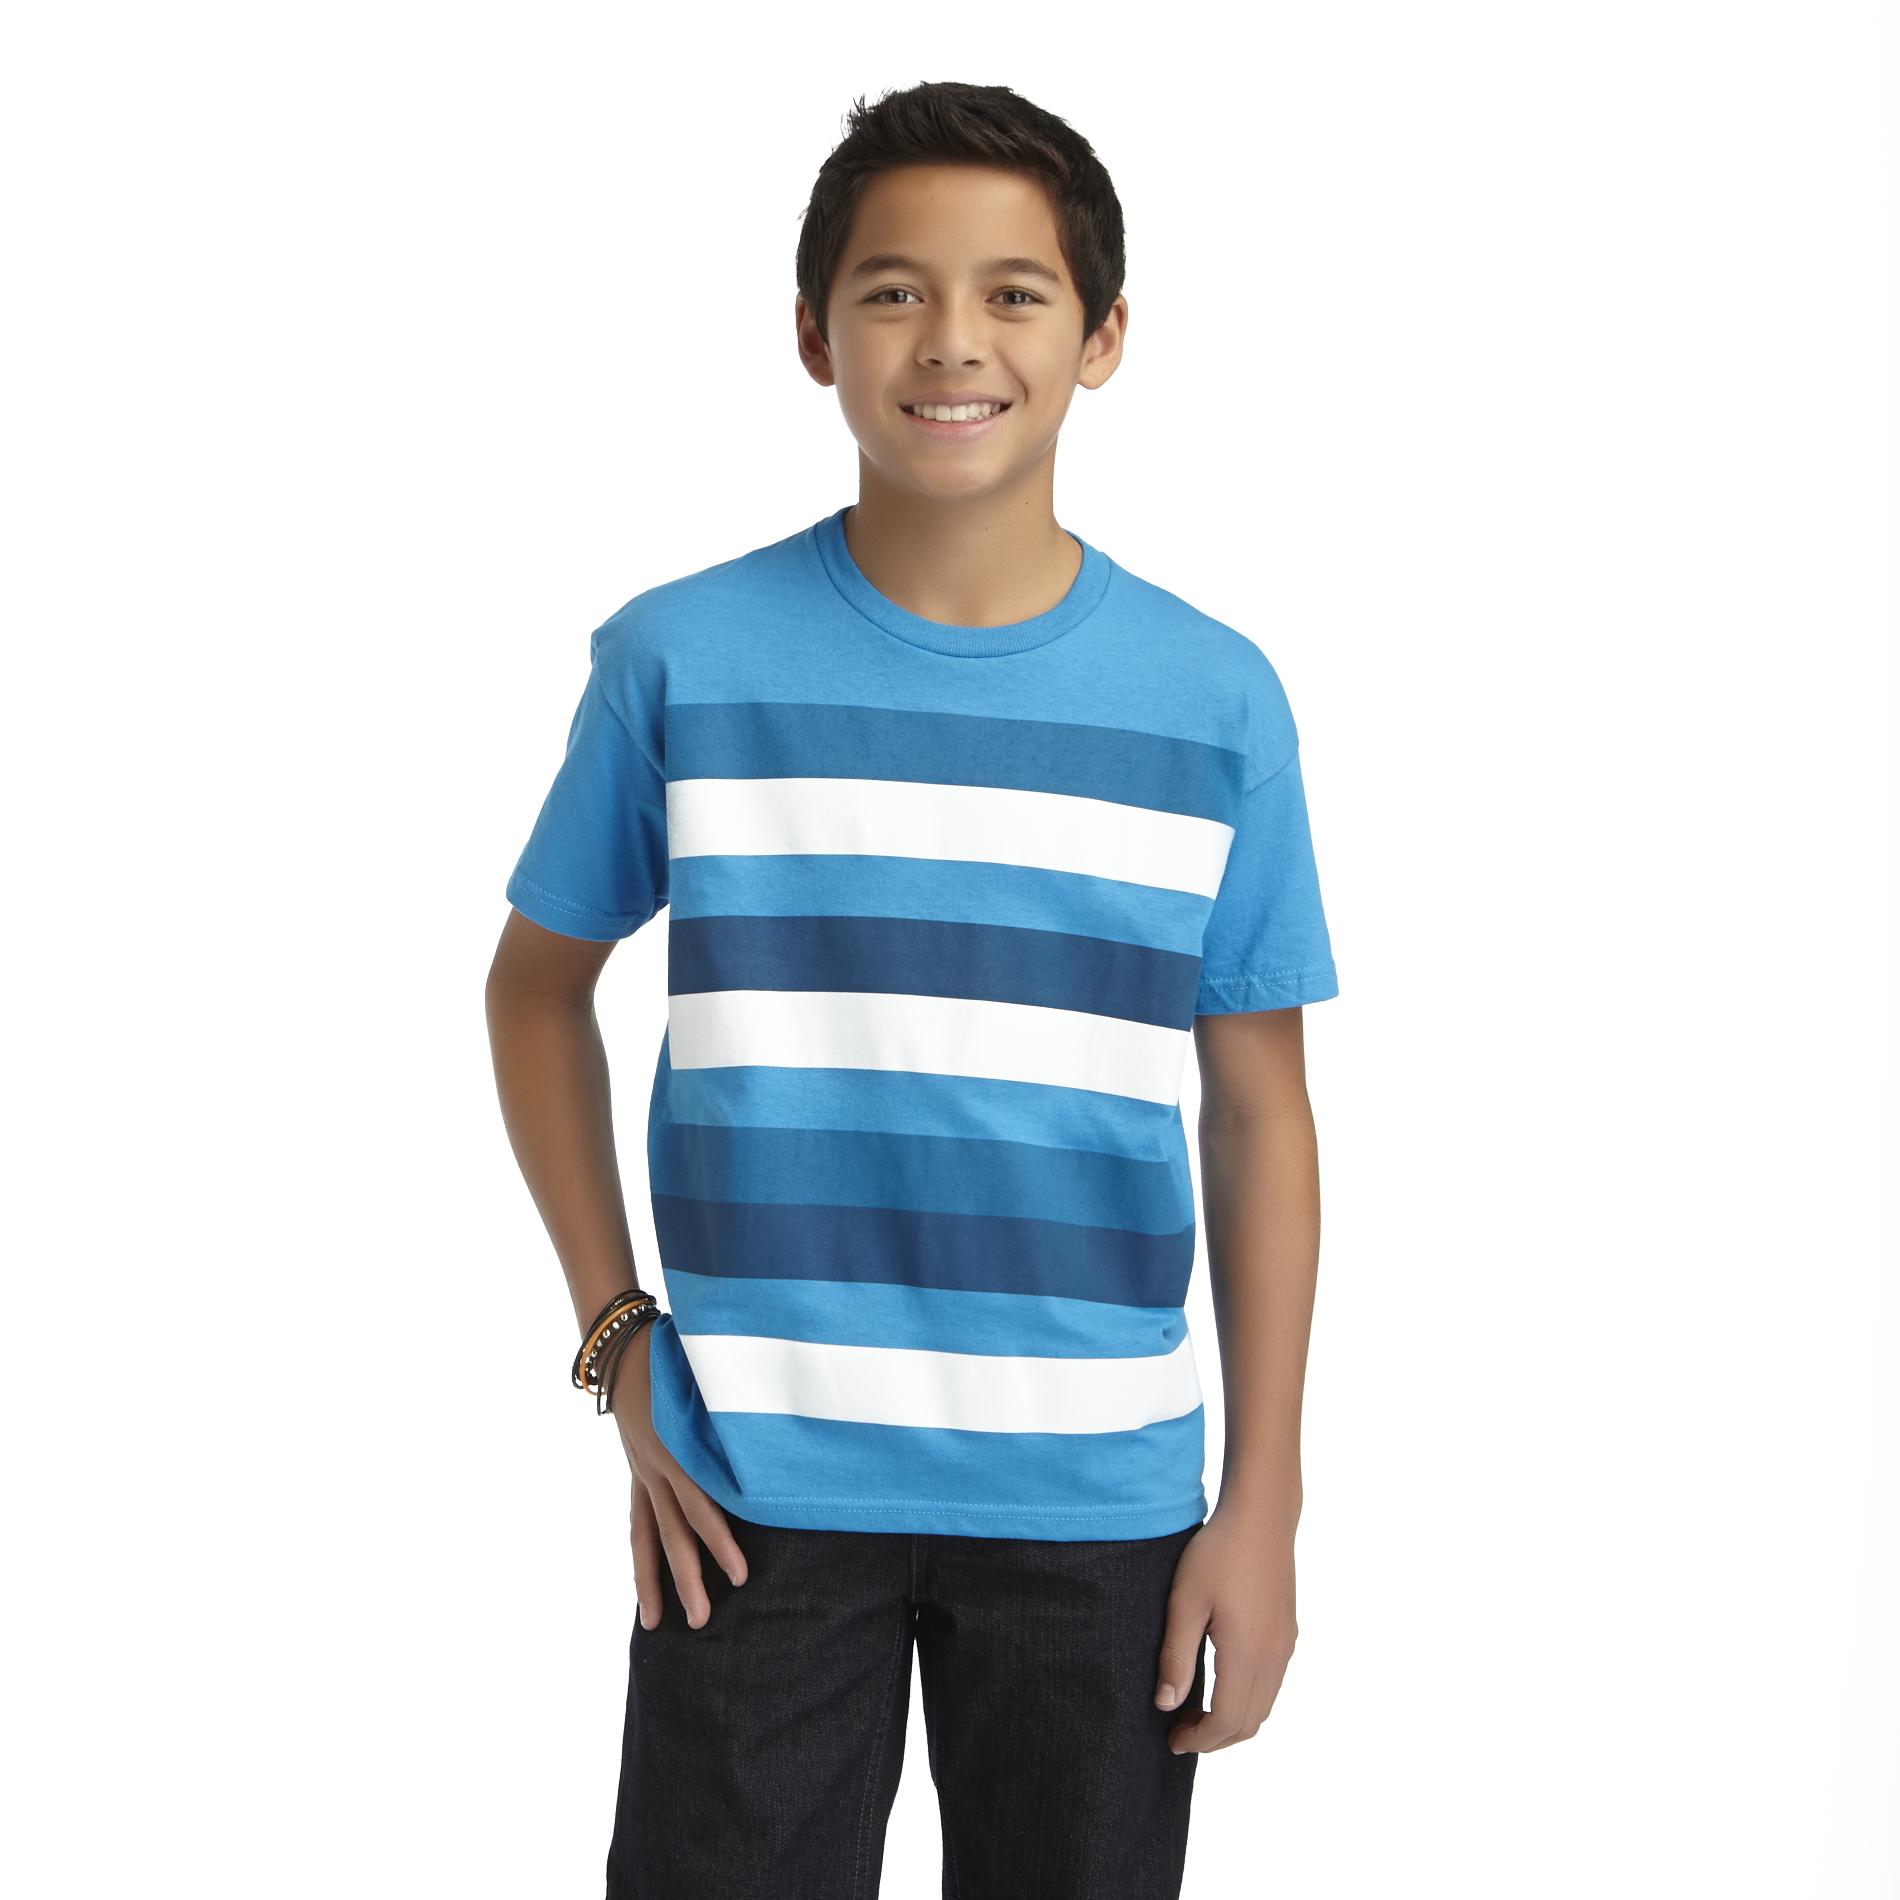 Infinite Visions Boy's T-Shirt - Double Striped